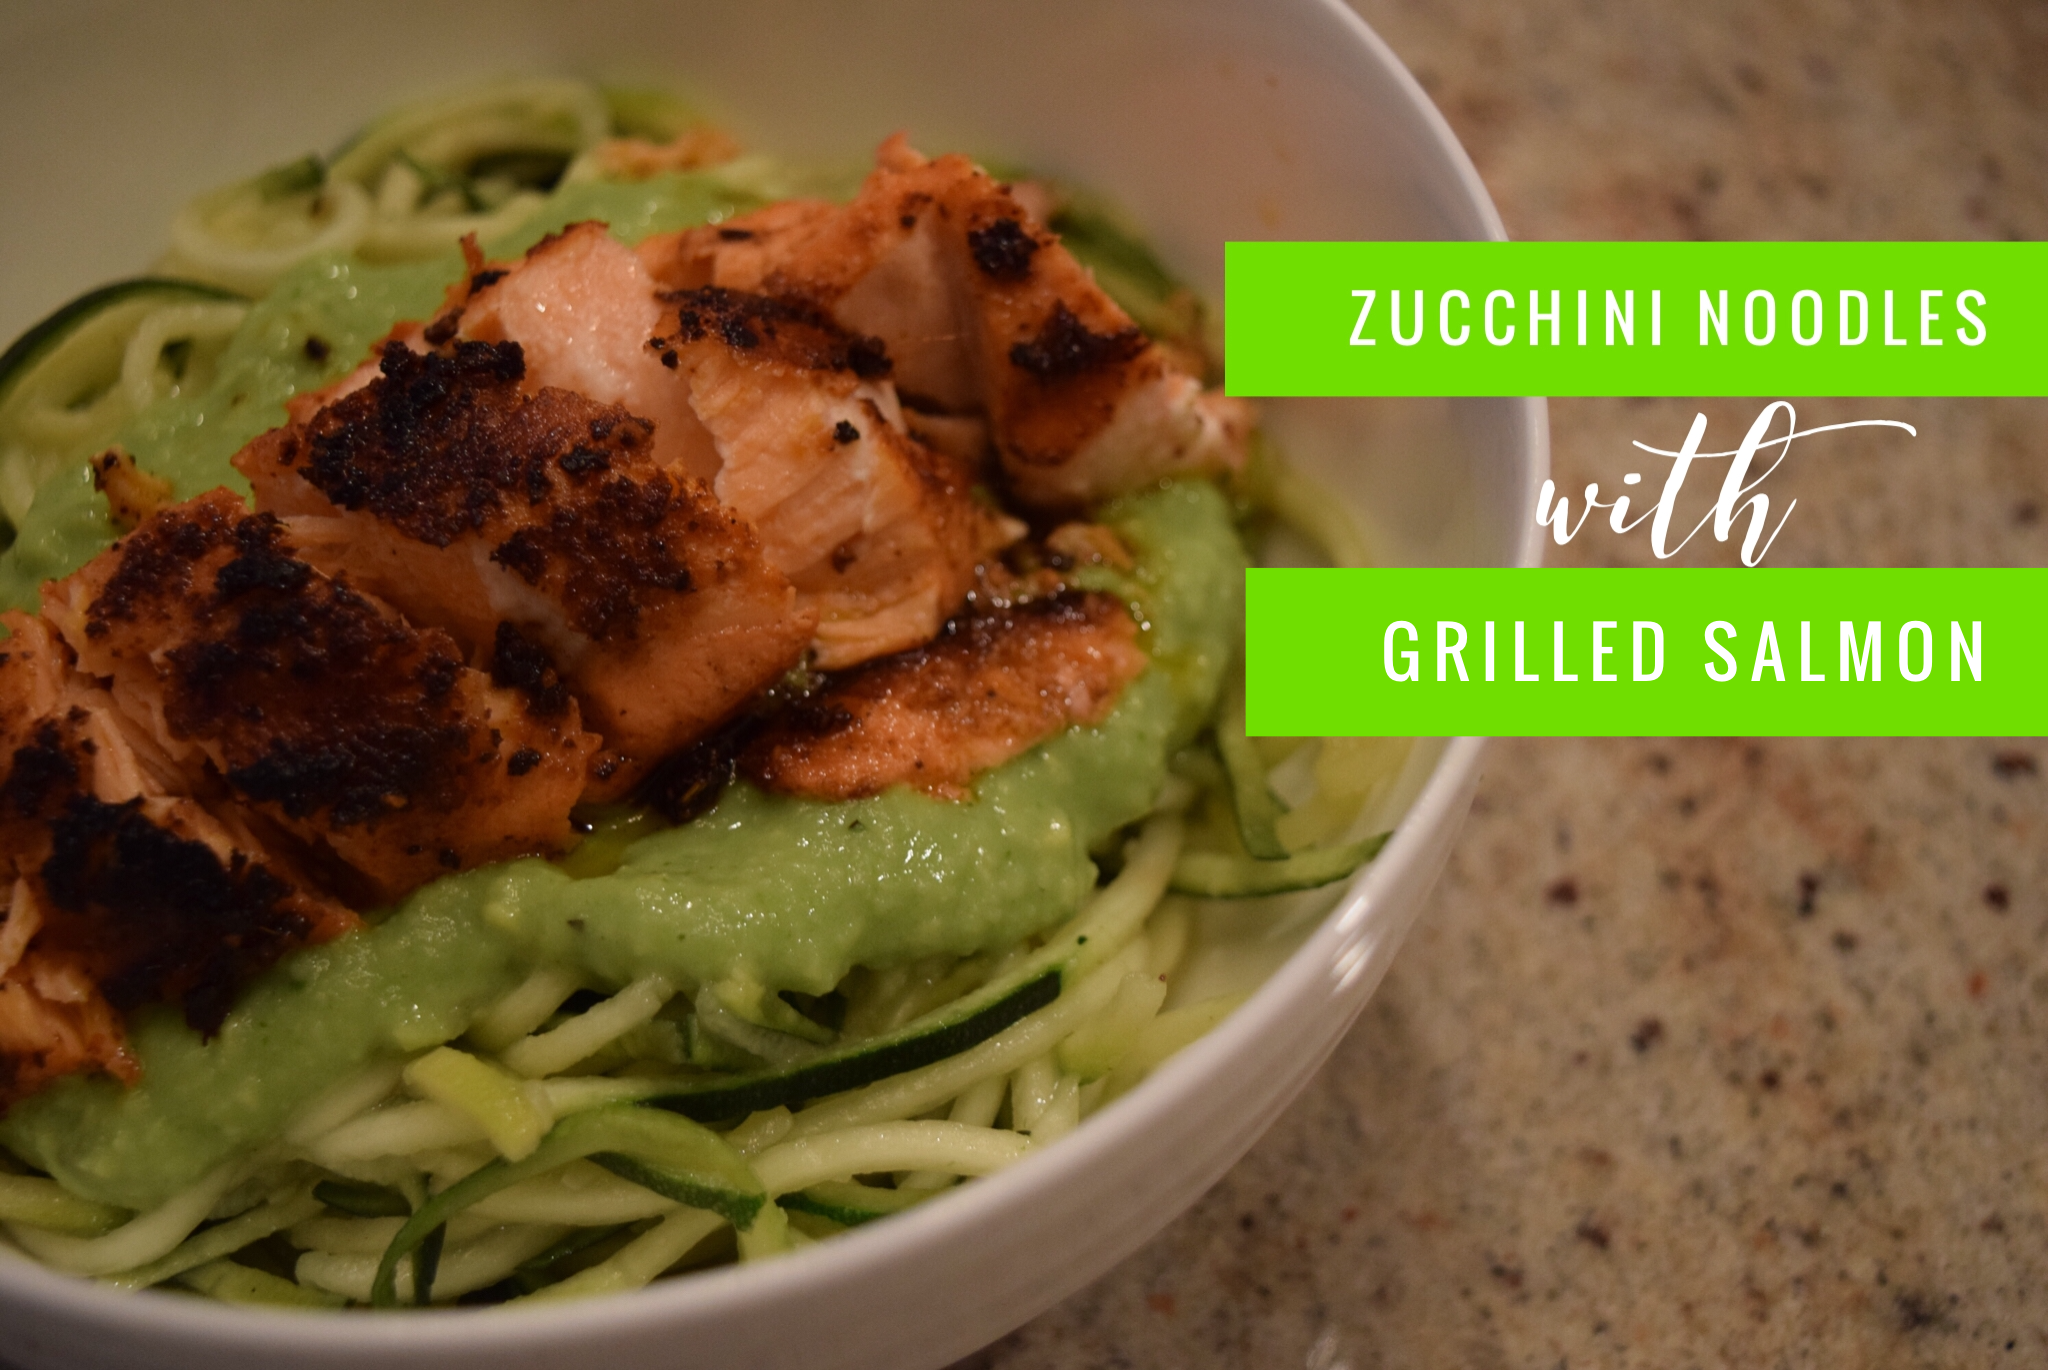 Zucchini Noodles with Grilled Salmon